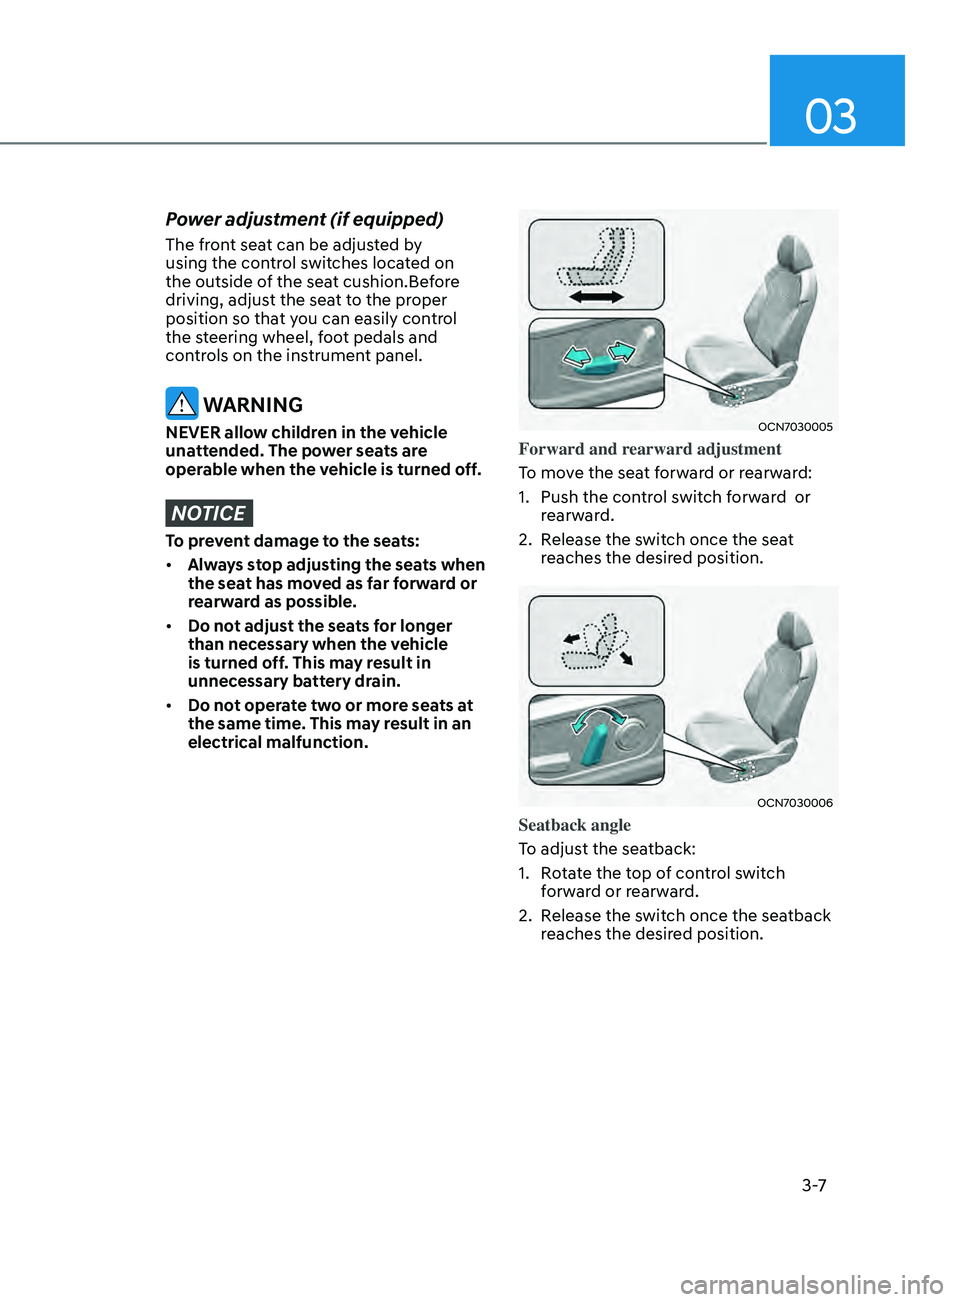 HYUNDAI ELANTRA 2021  Owners Manual 03
3 -7
Power adjustment (if equipped) 
The front seat can be adjusted by 
using the control switches located on 
the outside of the seat cushion.Before 
driving, adjust the seat to the proper 
positi